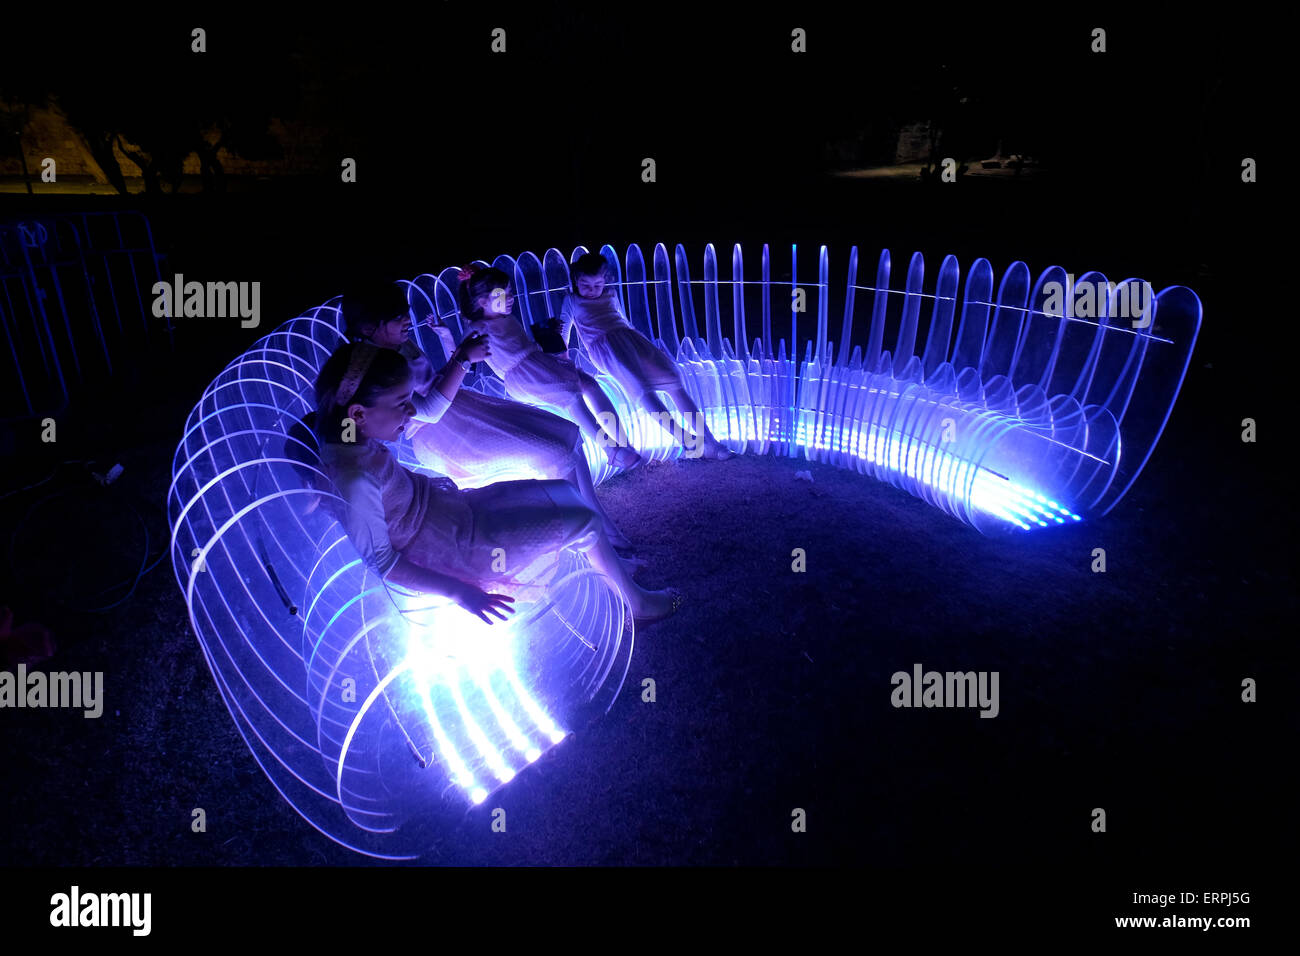 Jerusalem - ISRAEL 06 June 2015: Young Israeli girls sitting in a light art installation in the old city during the Jerusalem Festival of Lights in Israel on 06 June 2015. The festival is held annually around Jerusalem's old city with special effects illuminating historical sites. Stock Photo